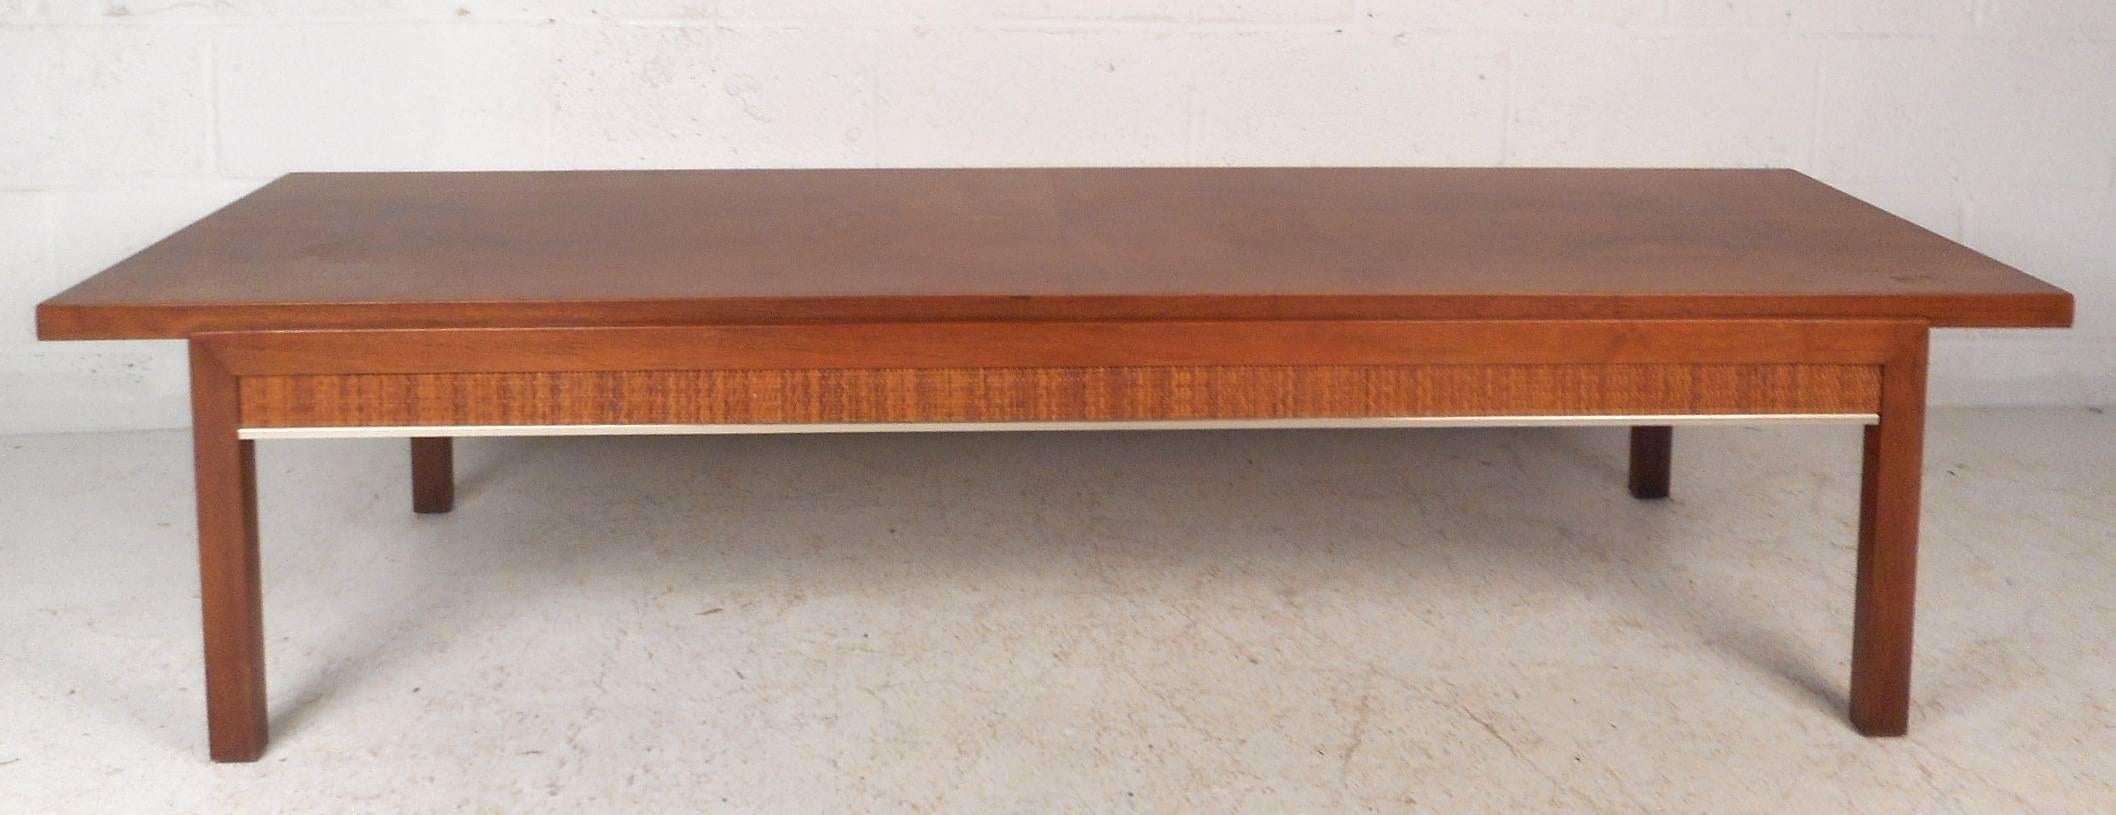 This stunning vintage modern coffee table features cane sides and a gorgeous walnut finish. Unique design with an oversized tabletop hangs over each side for added space. This straight line Mid-Century piece shows quality craftsmanship. This sleek